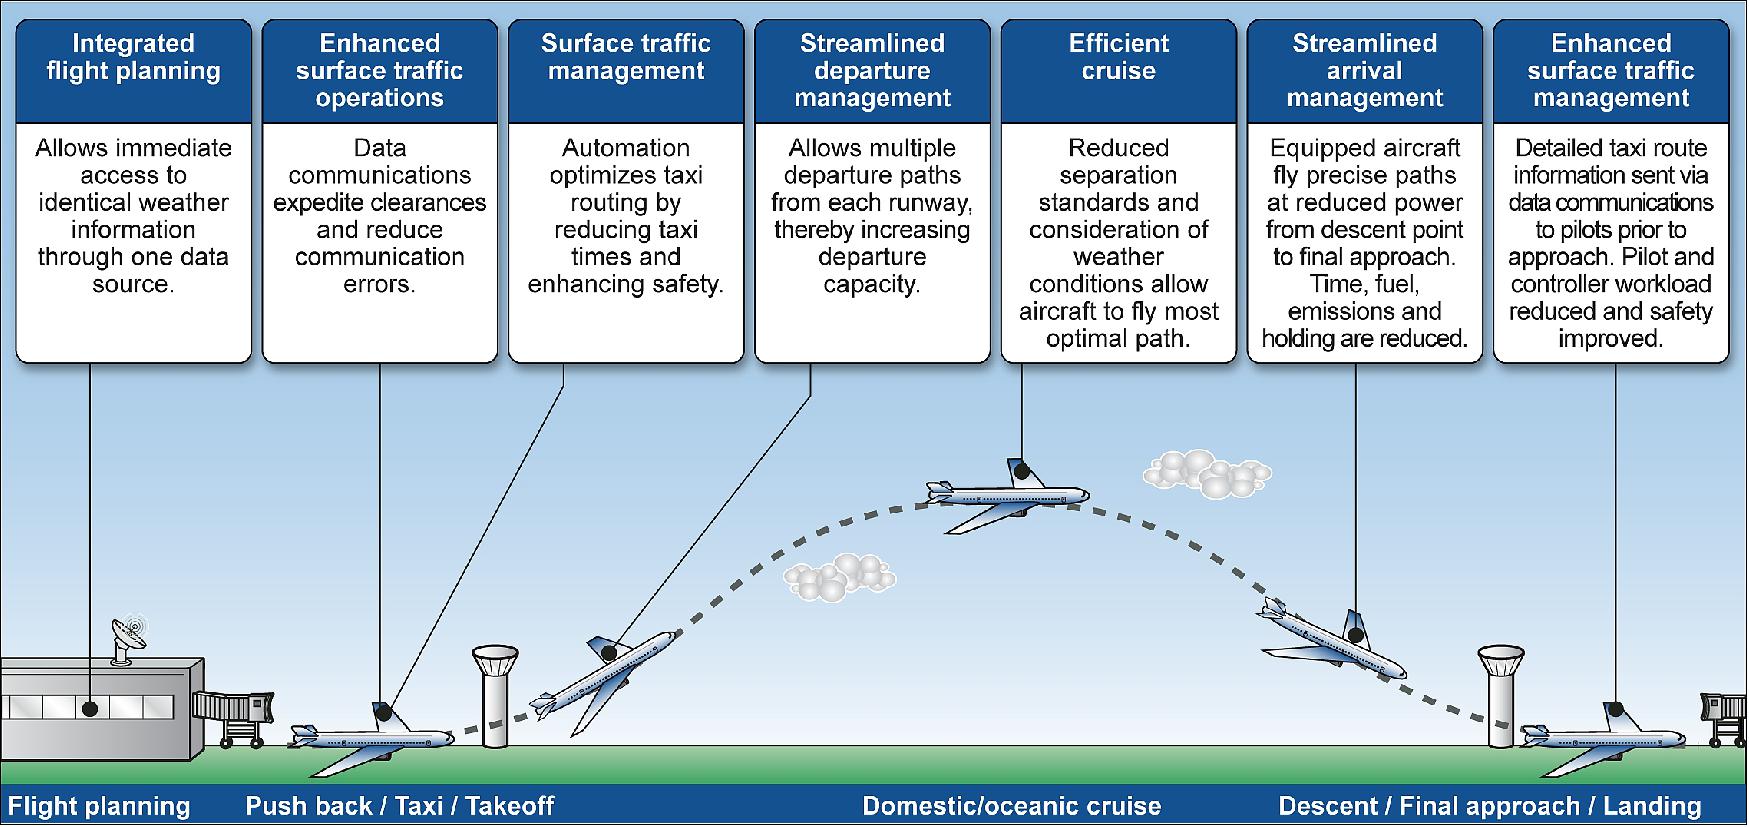 Figure 15: Improvements to phases of flight expected under NextGen (Next Generation Air Transportation System), image credit: FAA